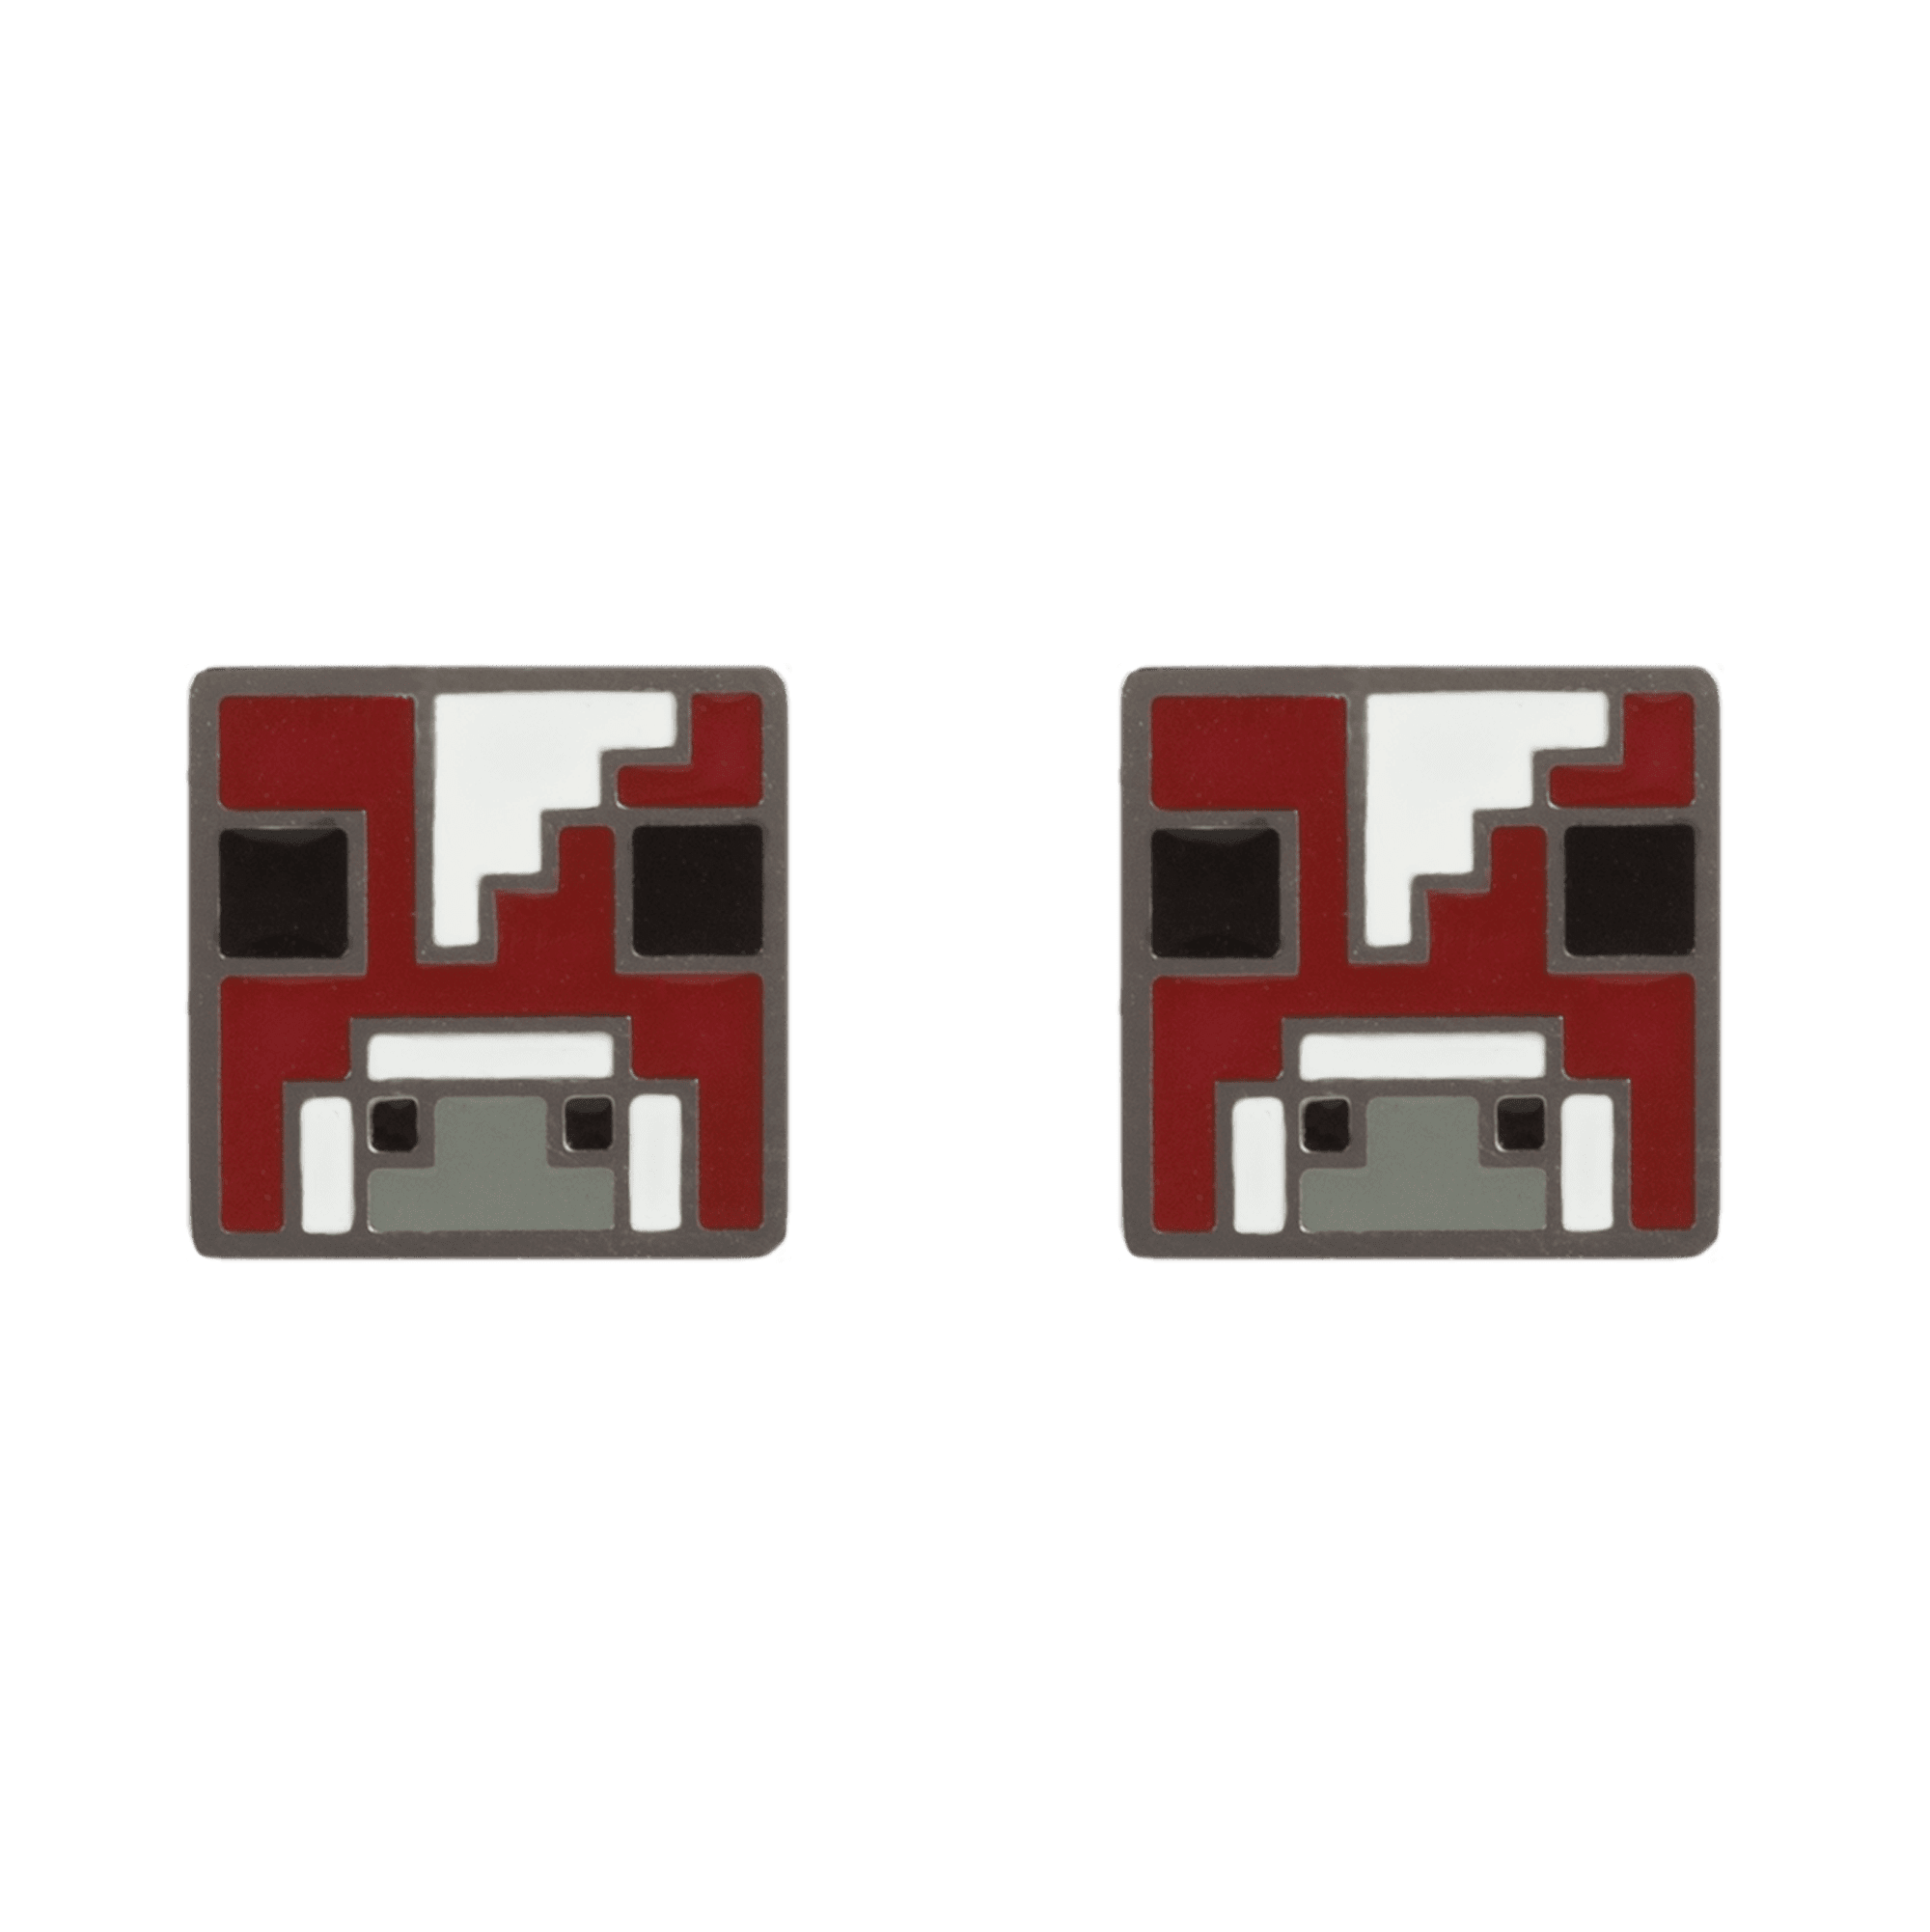 A pair of red and white pixelated cufflinks.